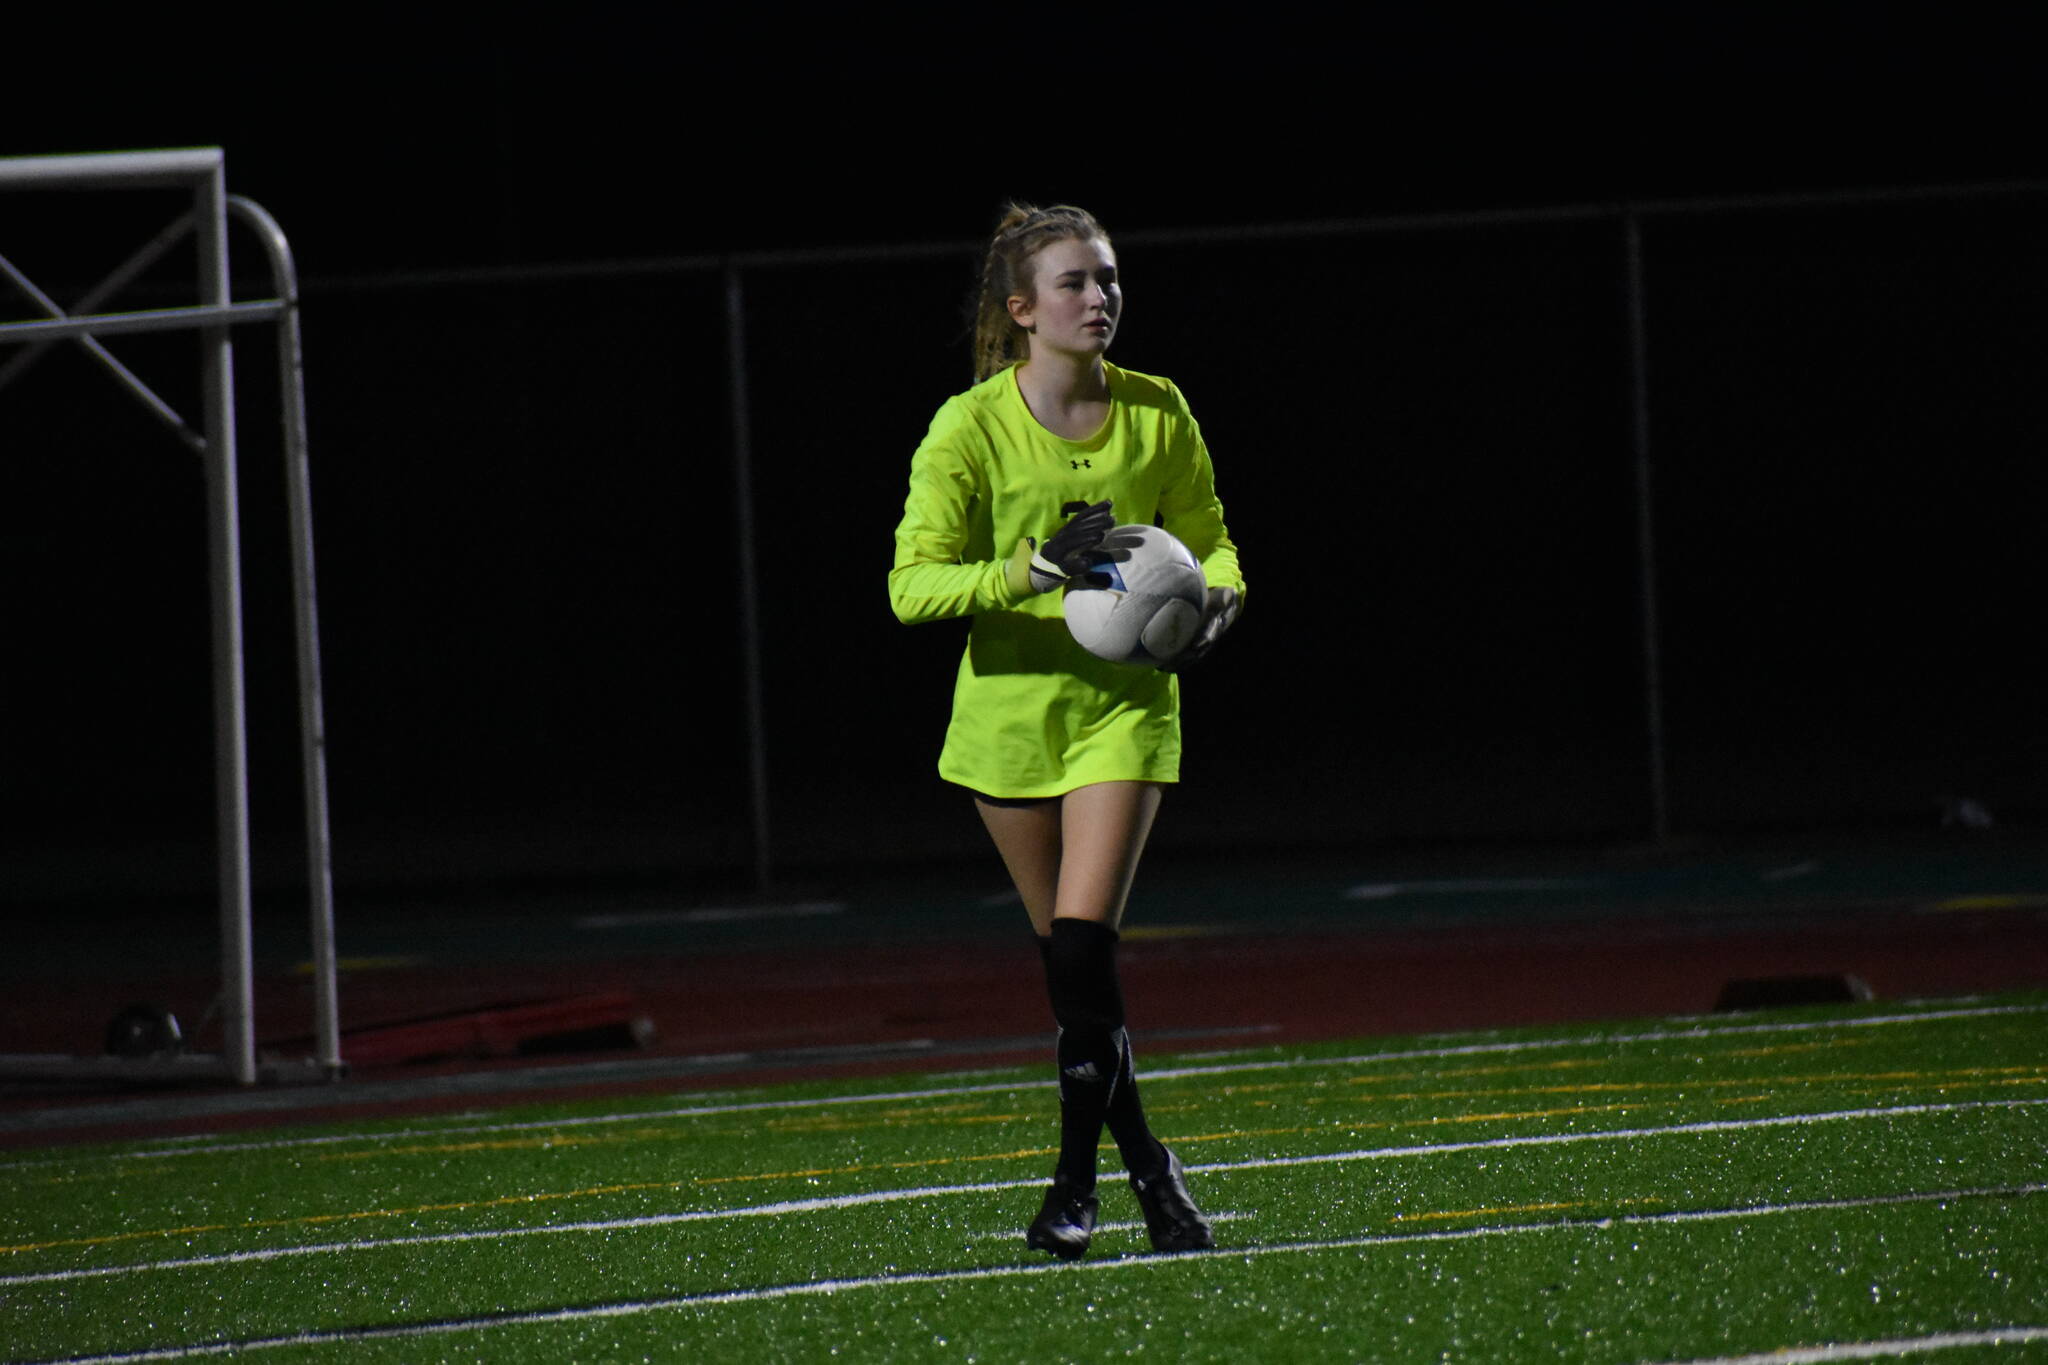 Trojan keeper looking for options down the field. Ben Ray / The Reporter